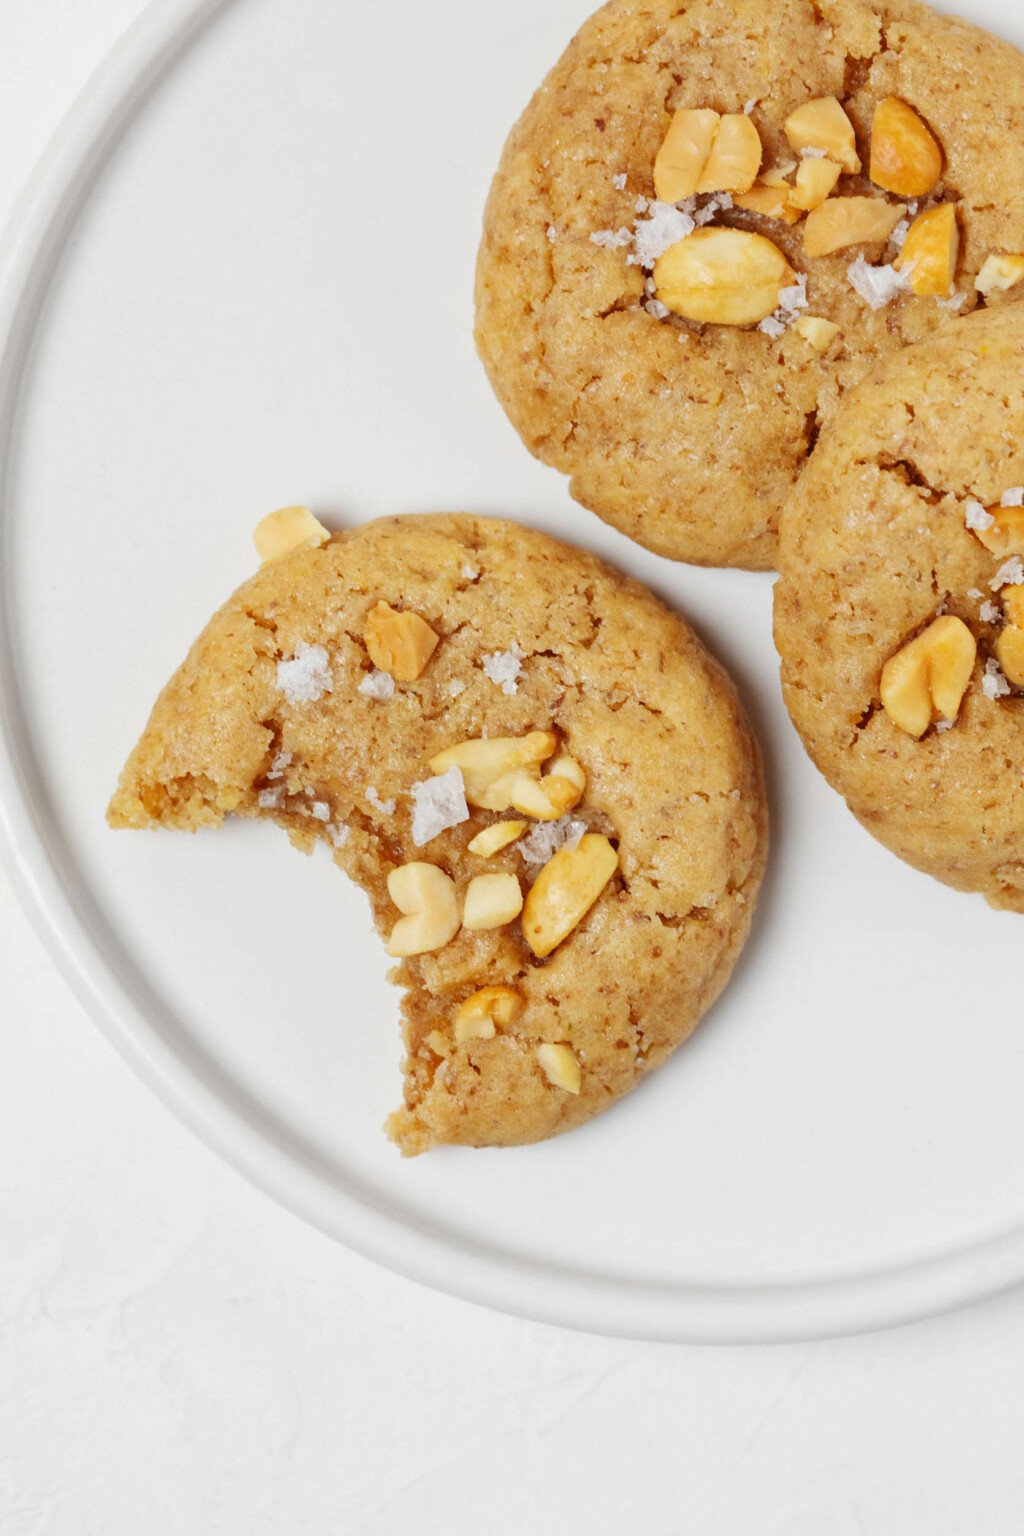 Three round, puffy vegan peanut cookies are positioned on a round, white plate. One of the cookies has a half-moon shaped bite taken out of it.